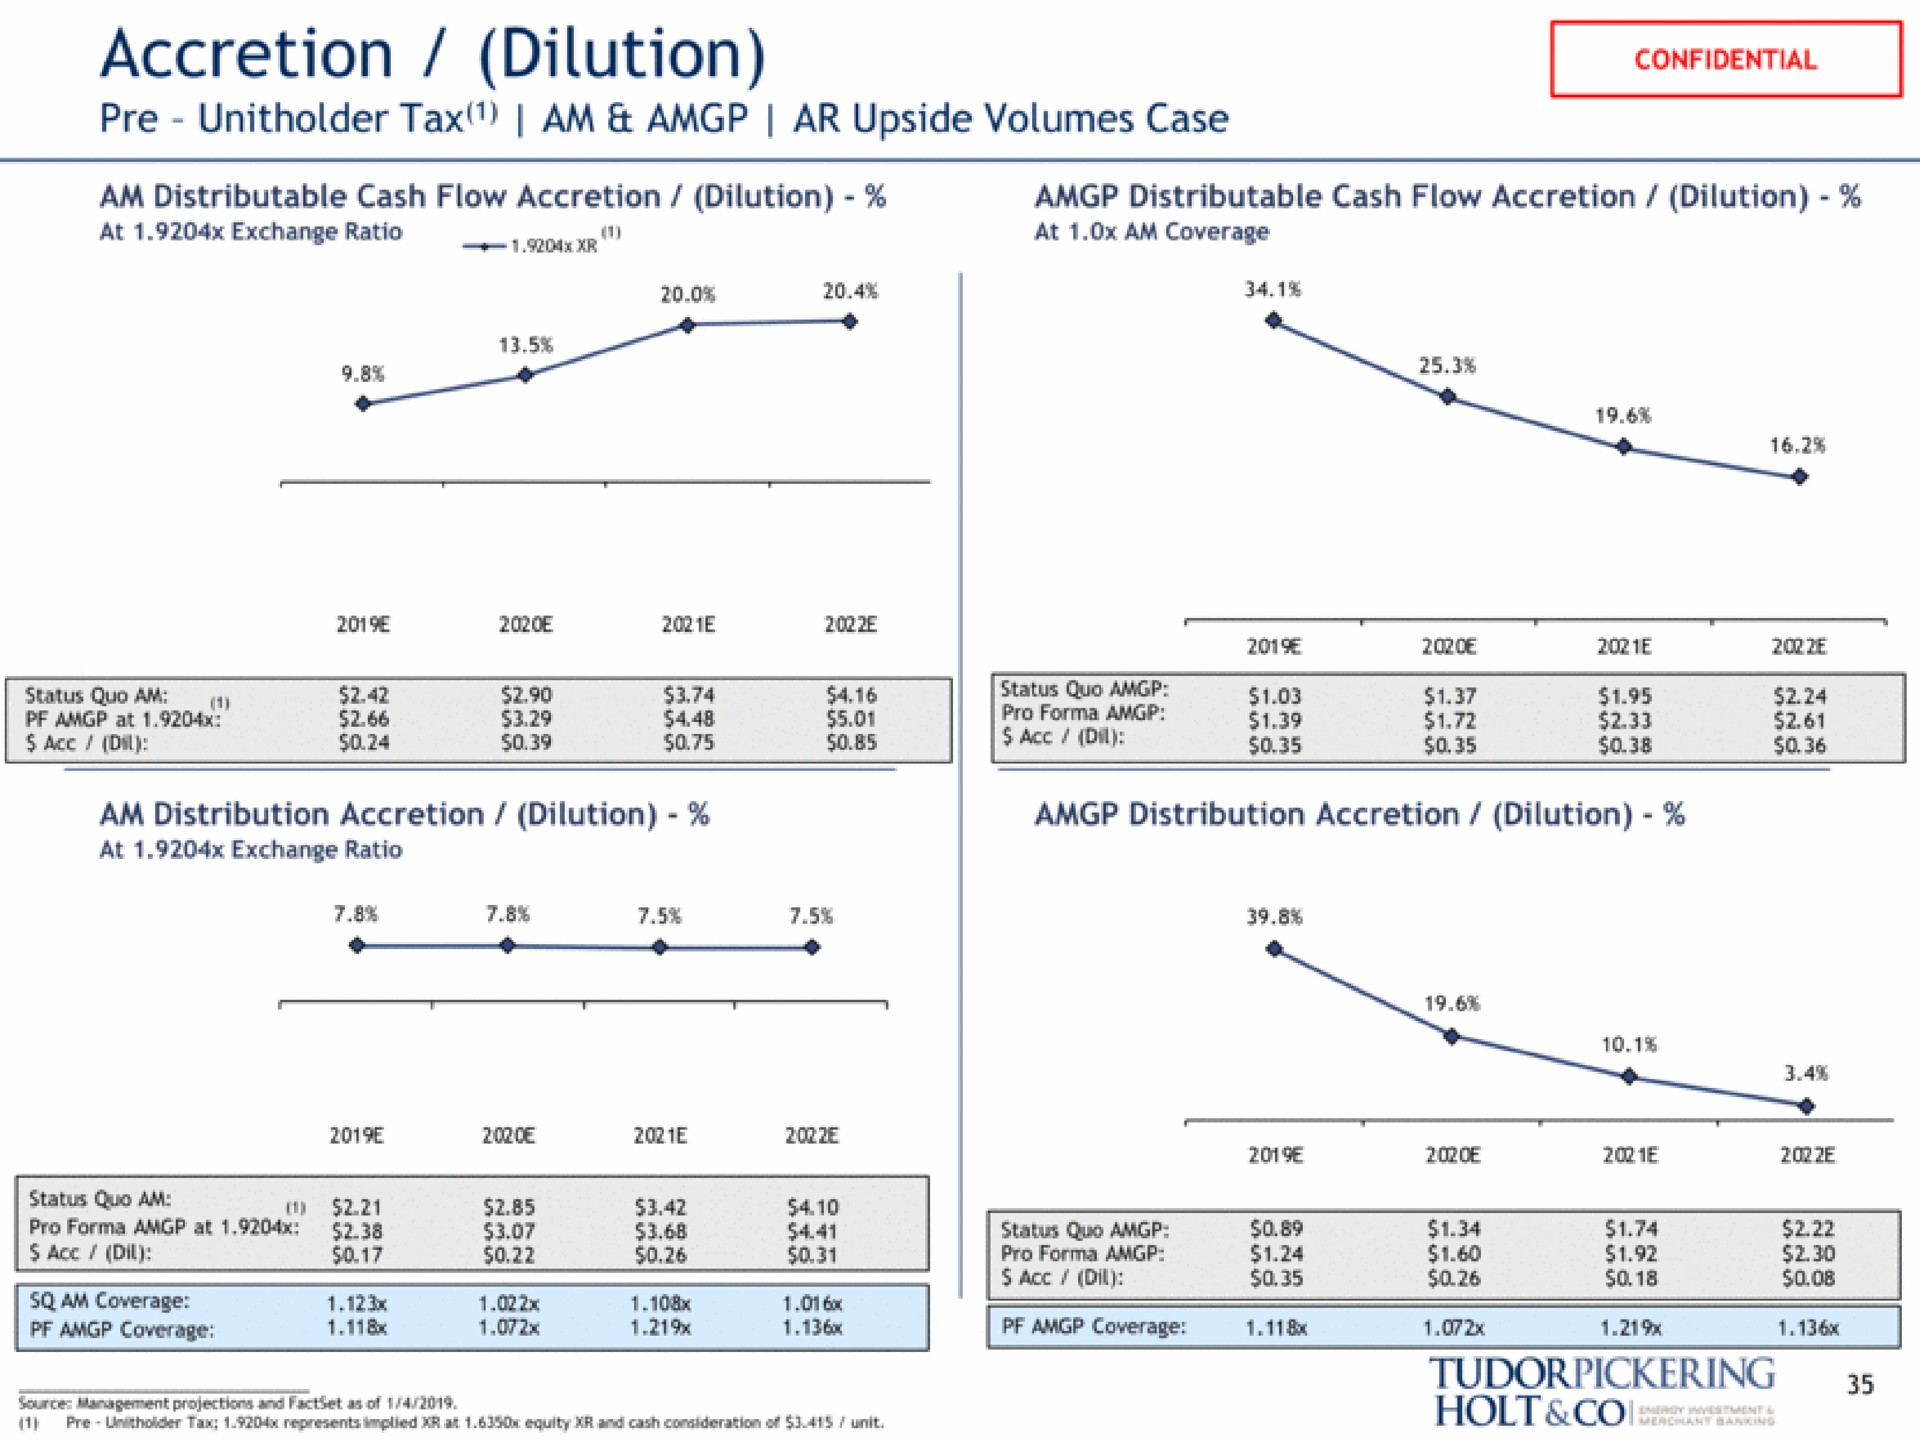 accretion dilution tax am upside volumes case | Tudor, Pickering, Holt & Co